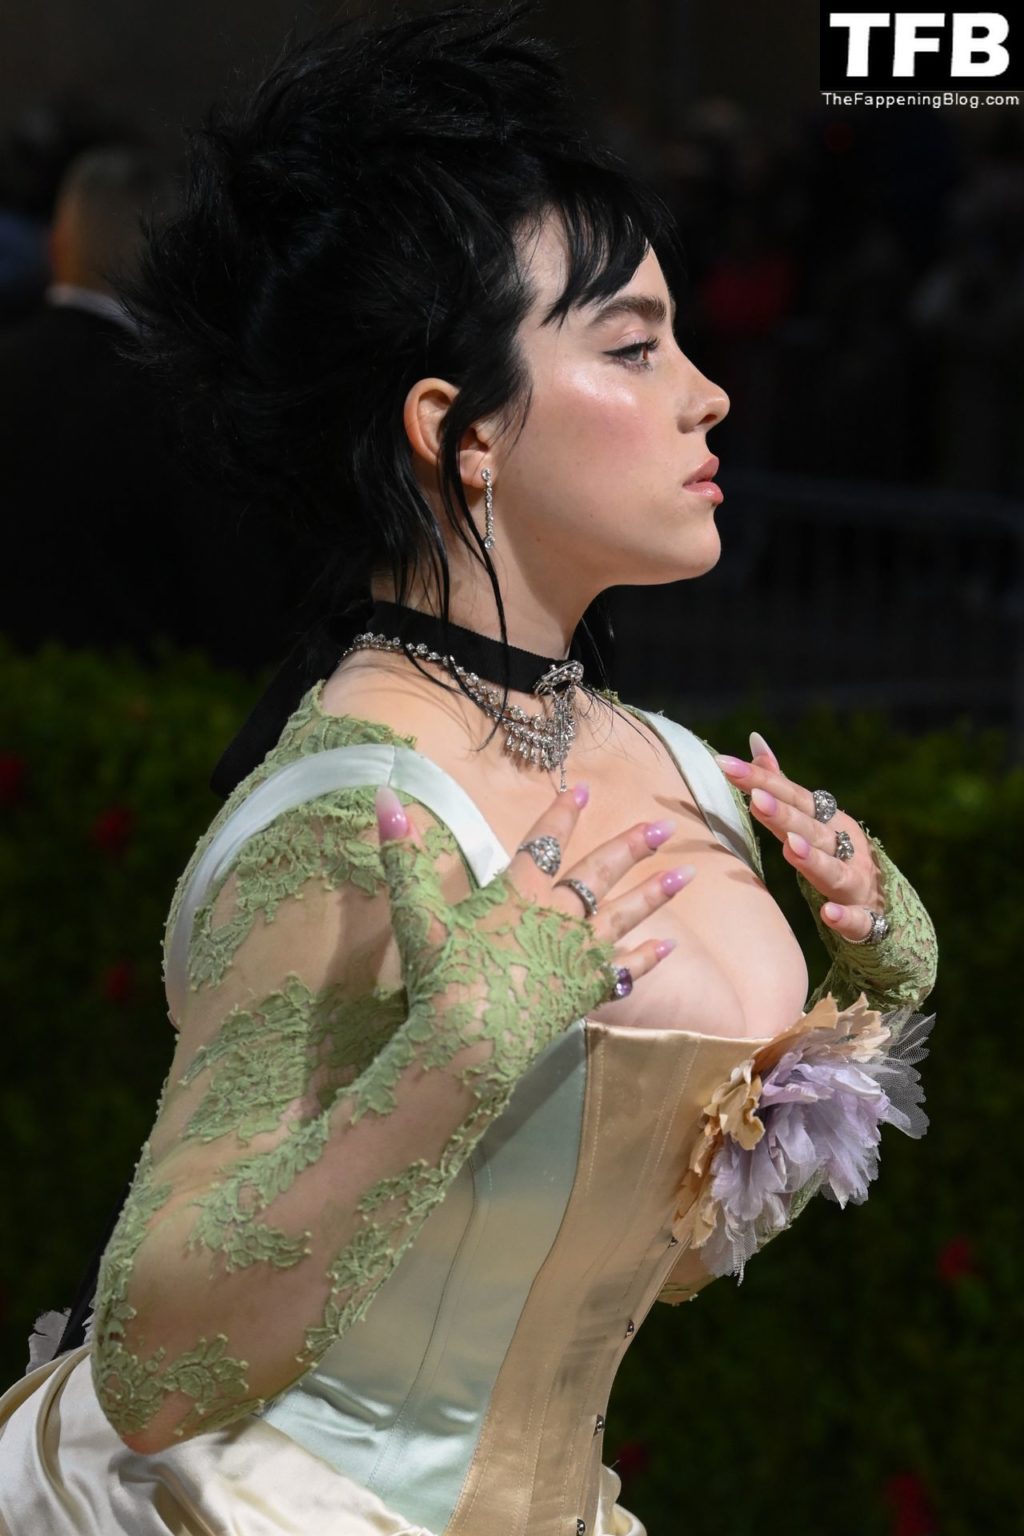 Billie Eilish Sexy The Fappening Blog 153 1024x1536 - Billie Eilish Showcases Nice Cleavage at The 2022 Met Gala in NYC (155 Photos)